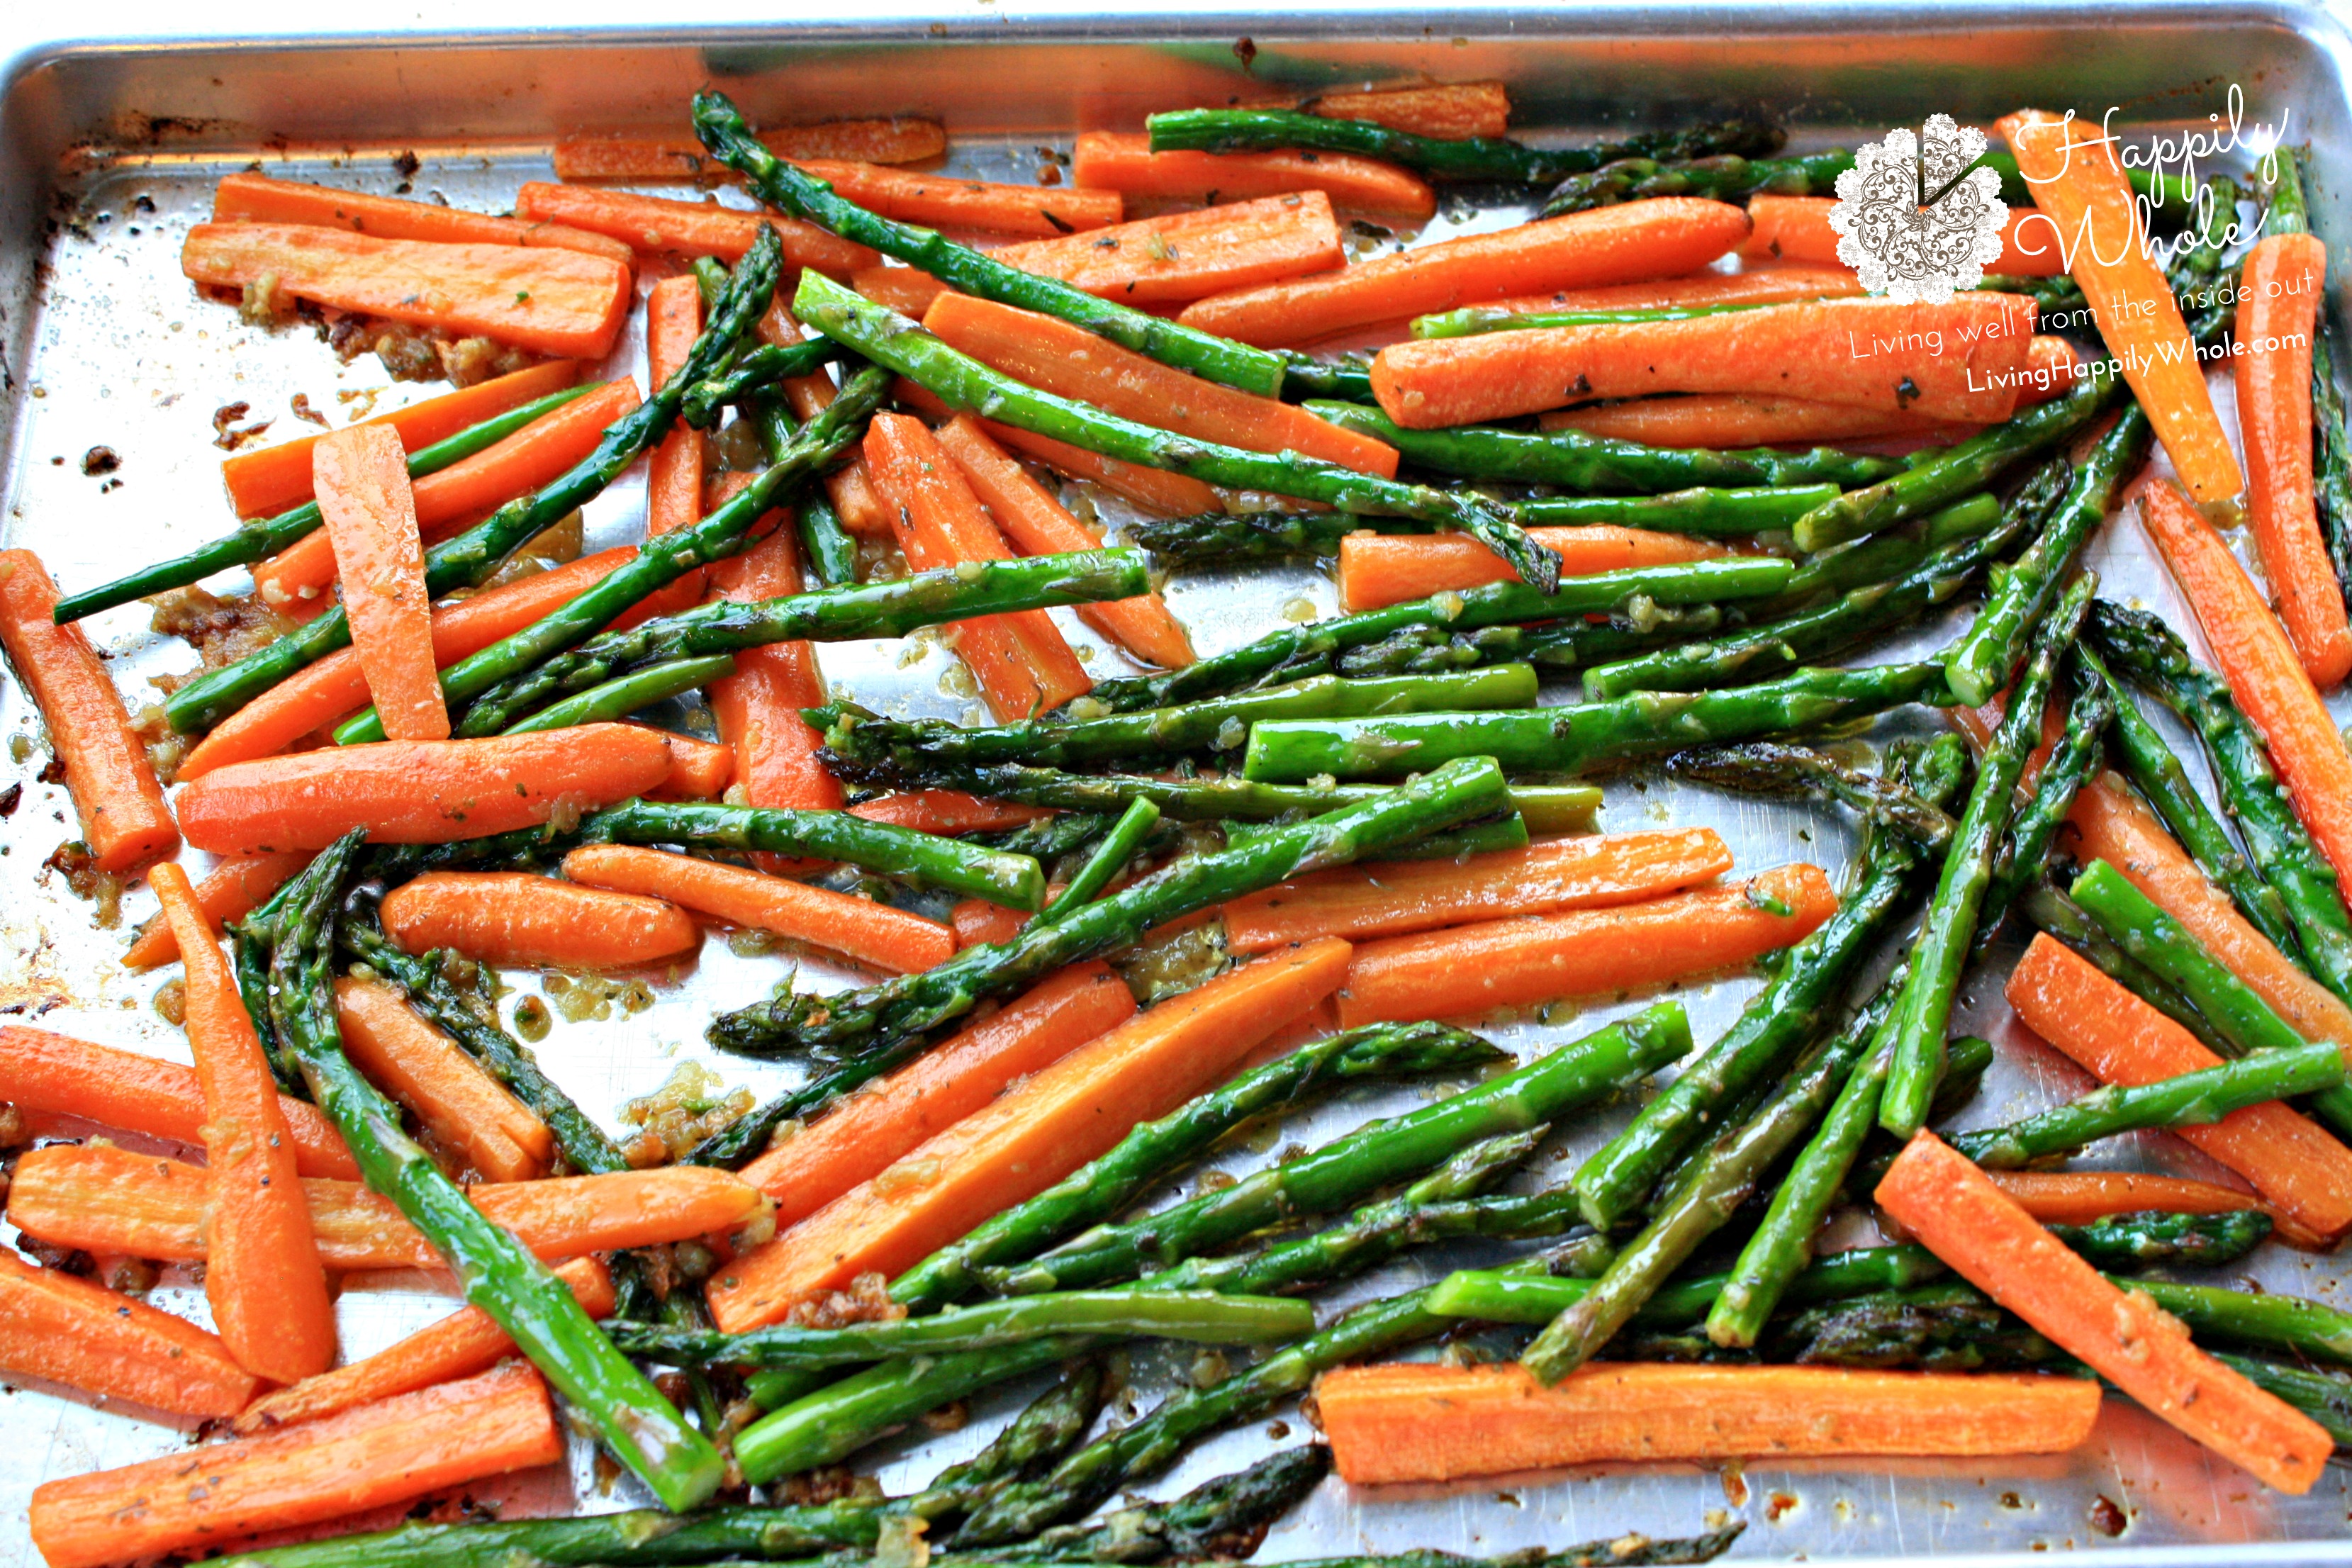 Garlic and Ghee roasted carrots and asparagus